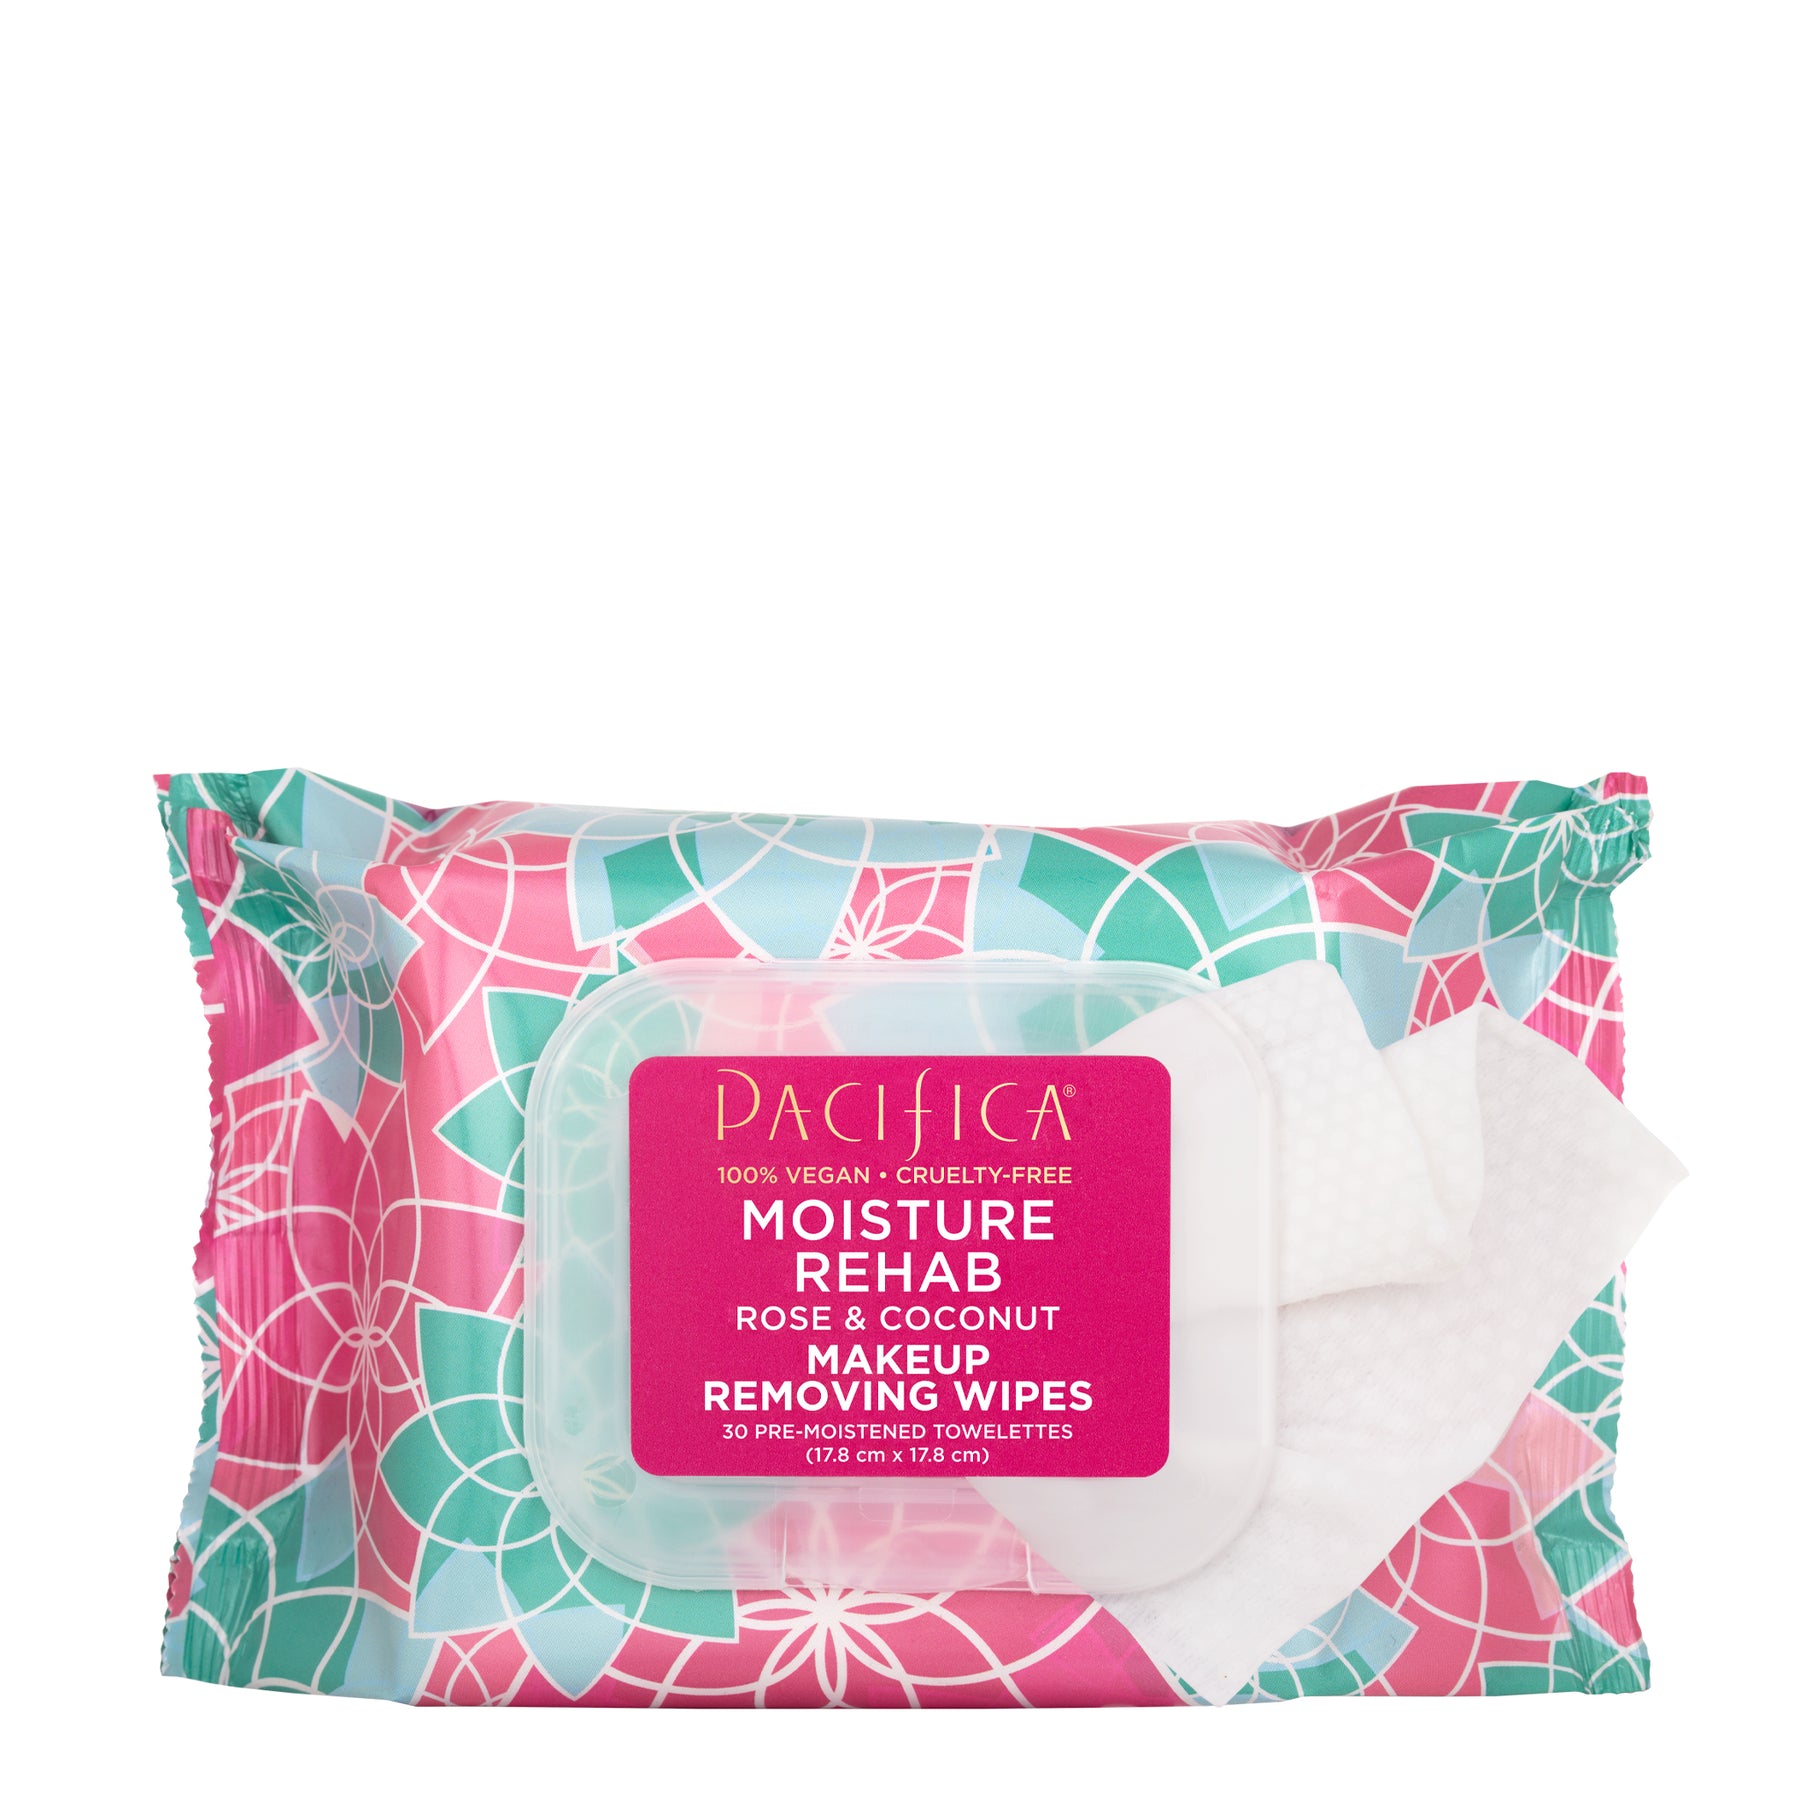 Moisture Rehab Rose & Coconut Makeup Removing Wipes - Skin Care - Pacifica Beauty